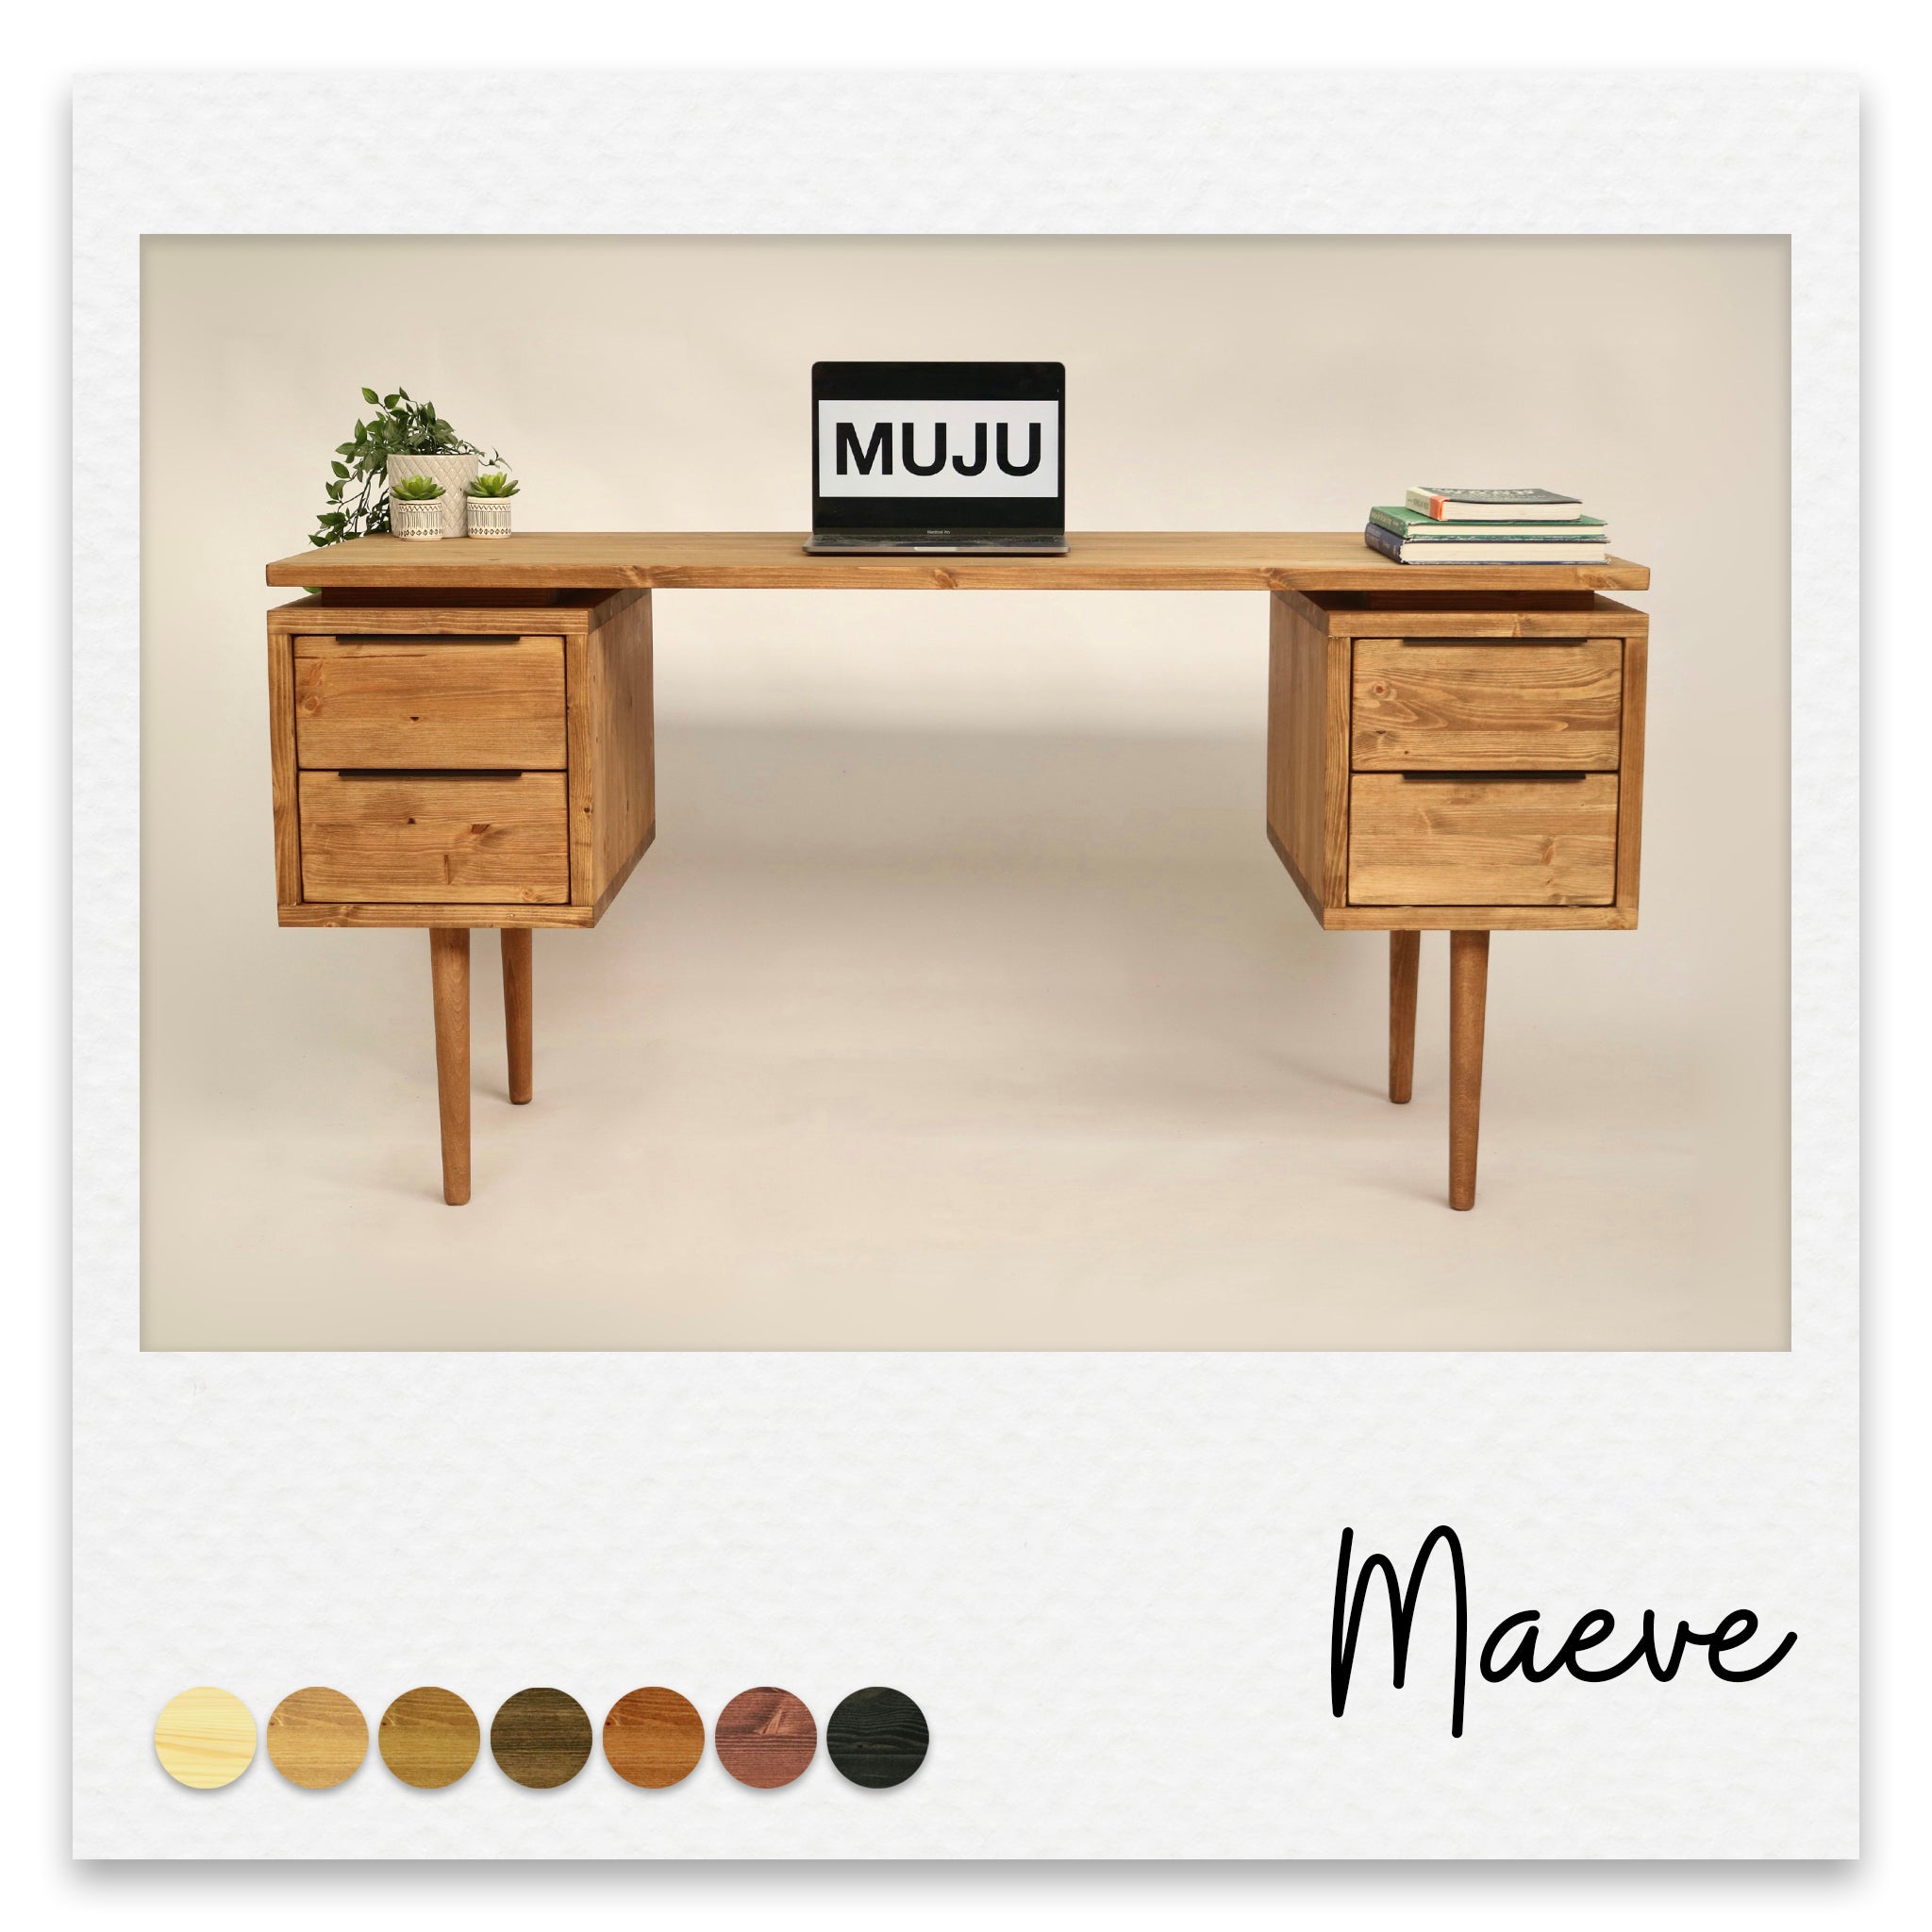 Large Executive Wooden Desk with Double Pedestal Drawers - Maeve